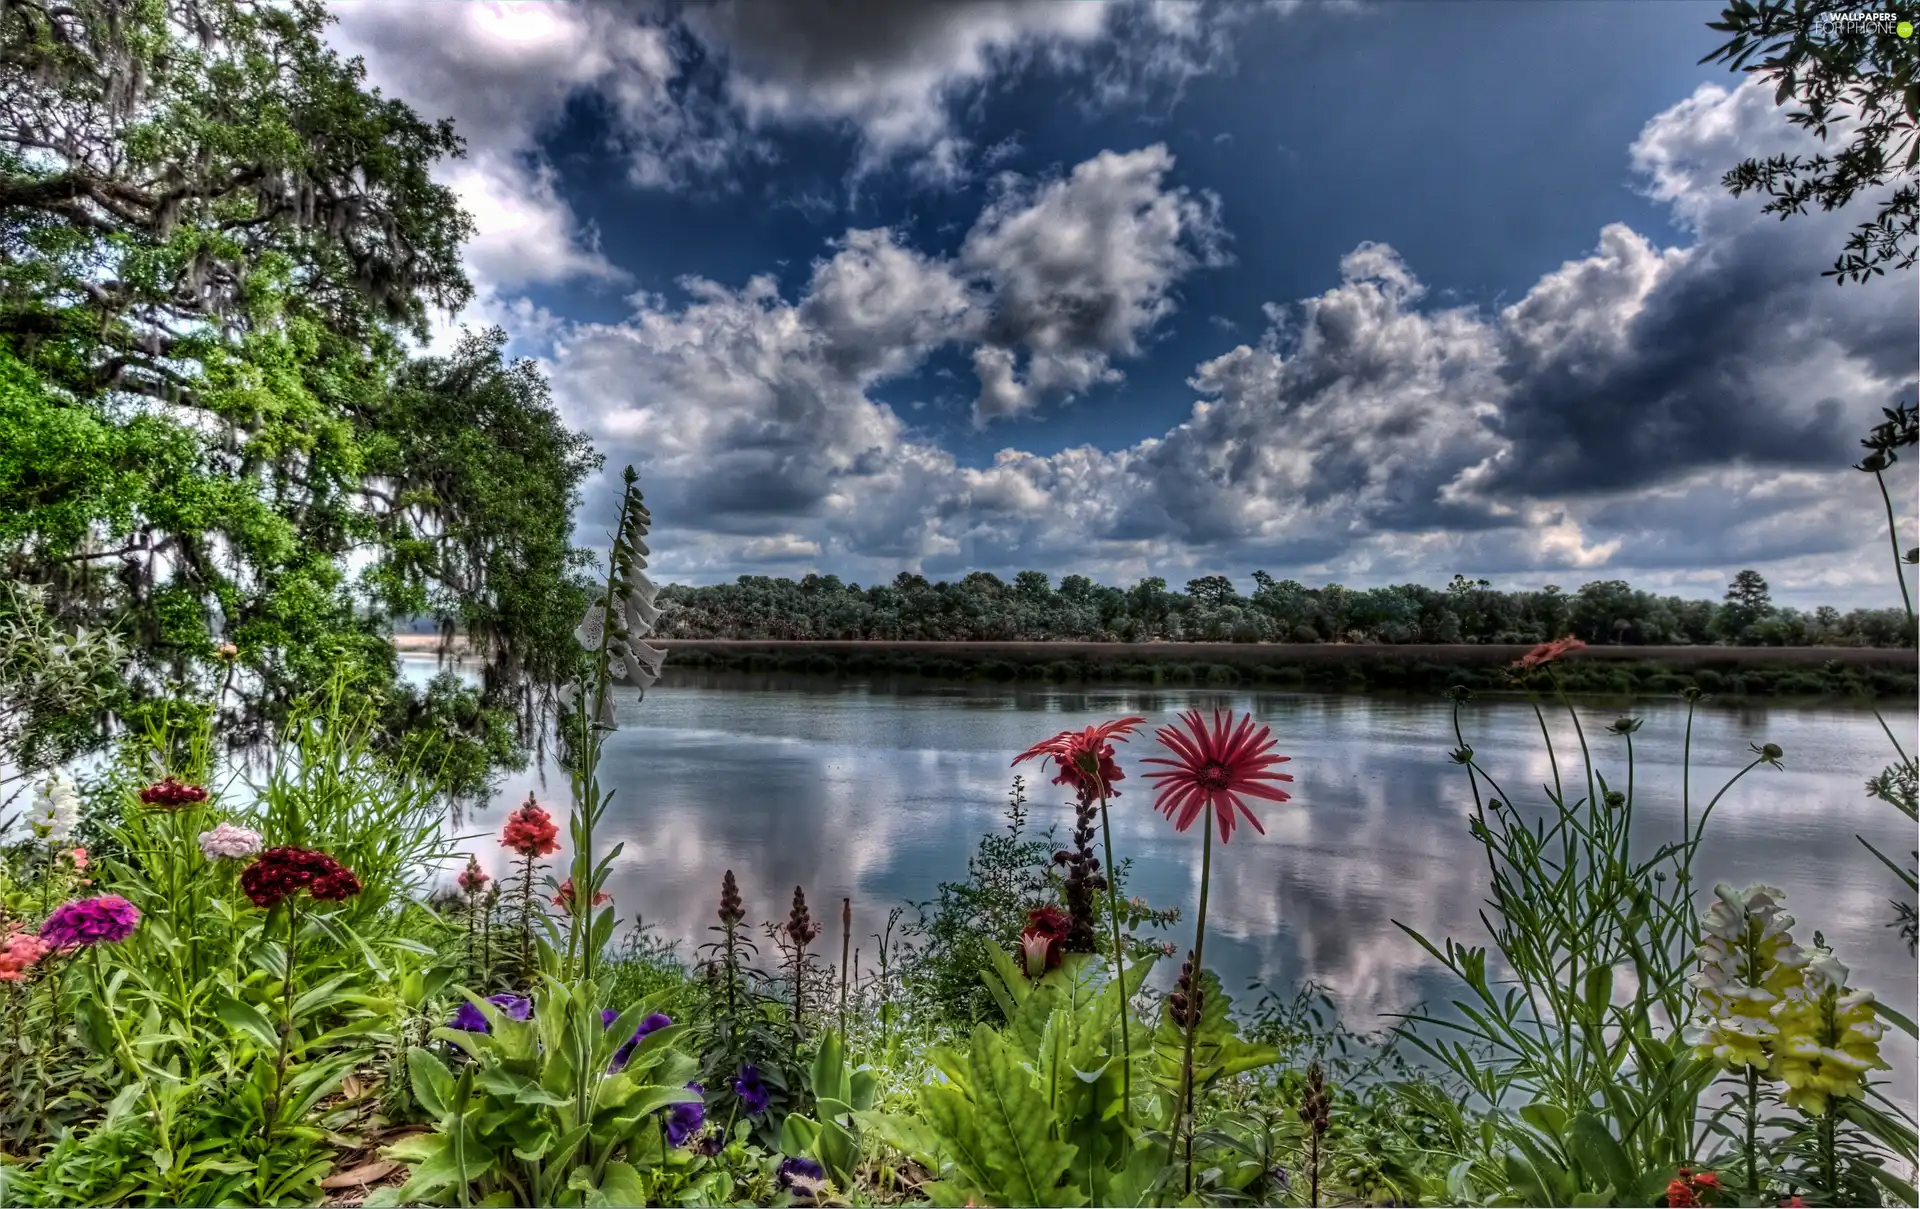 trees, viewes, lake, Flowers, clouds